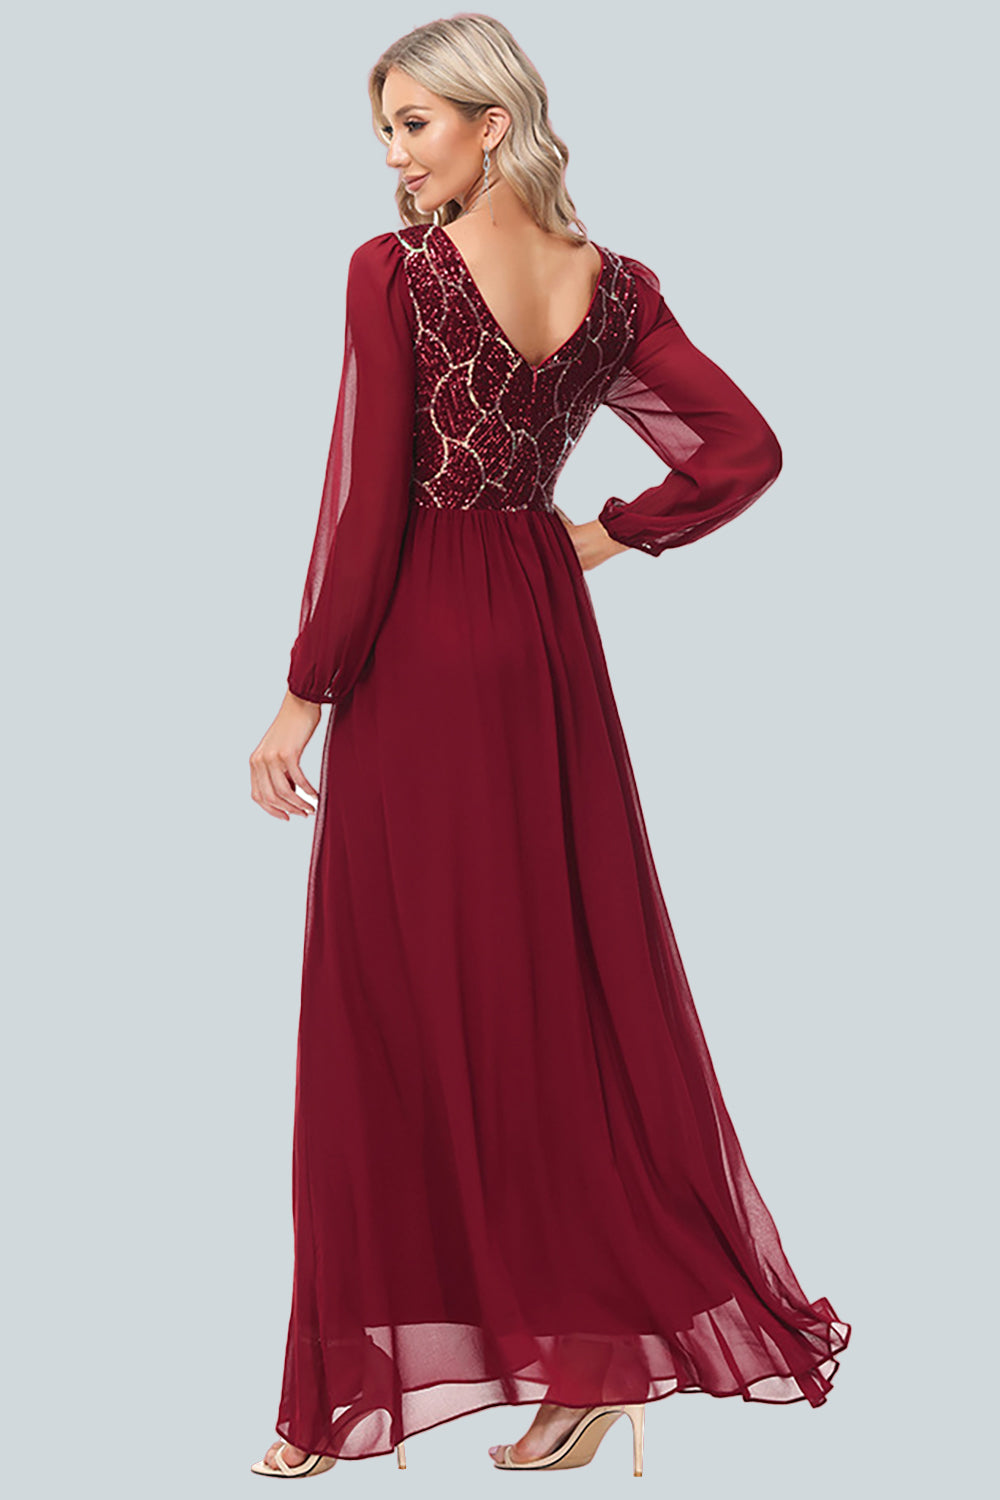 Elegant A-line Round Neck Chiffon Splicing Sequined Toast Dress Evening Dress with Slit